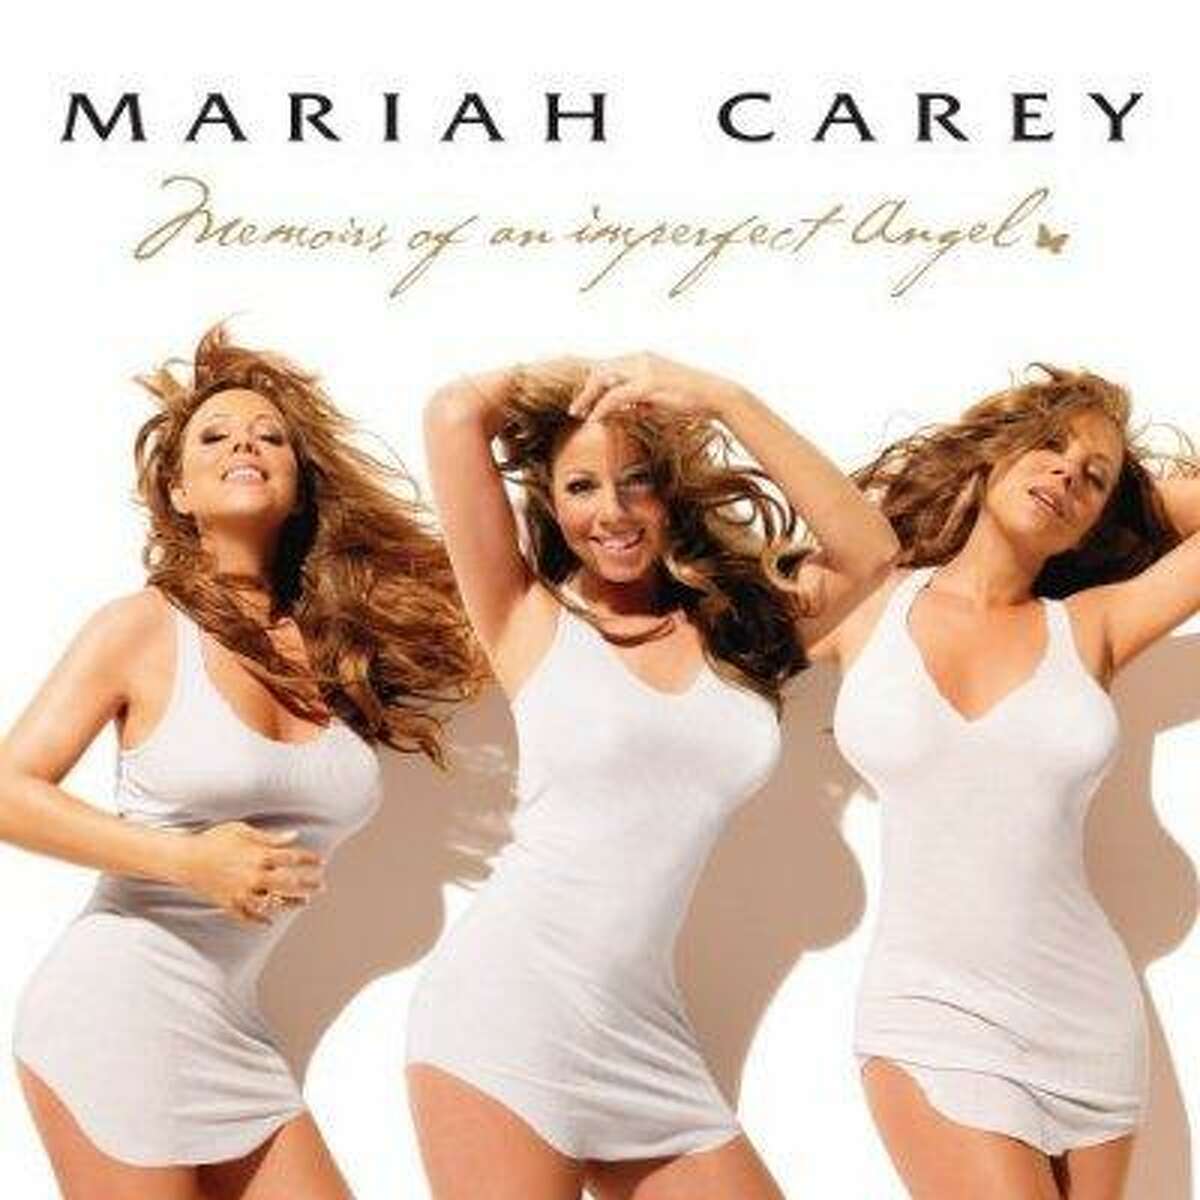 Once a year, usually in September, a flurry of high-profile new releases fall on the same day. Here's what's new: Memoirs Of An Imperfect Angel (3 stars), Mariah Carey, Island Records. The songs on Mariah Carey’s 12th studio disc cover familiar hitmaking territory: being wronged, being flirty and being at the club. It works for her. Read more about her new album here.